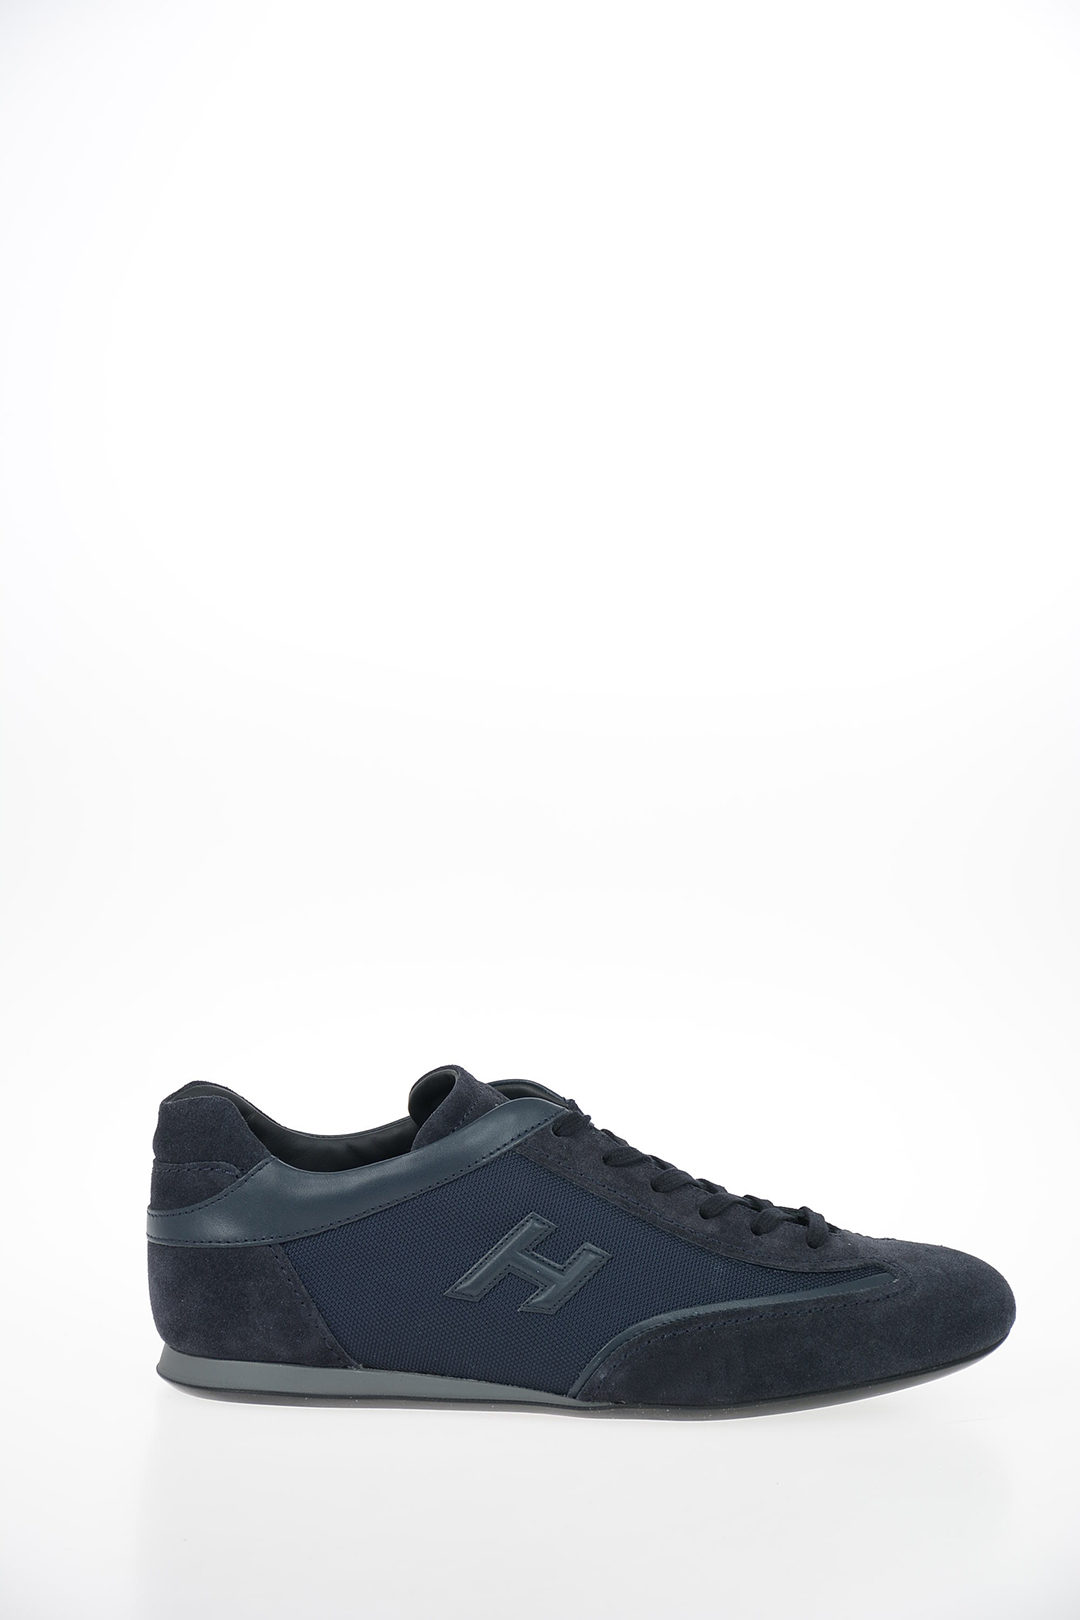 Hogan Sneakers OLYMPIA in Suede uomo - Glamood Outlet